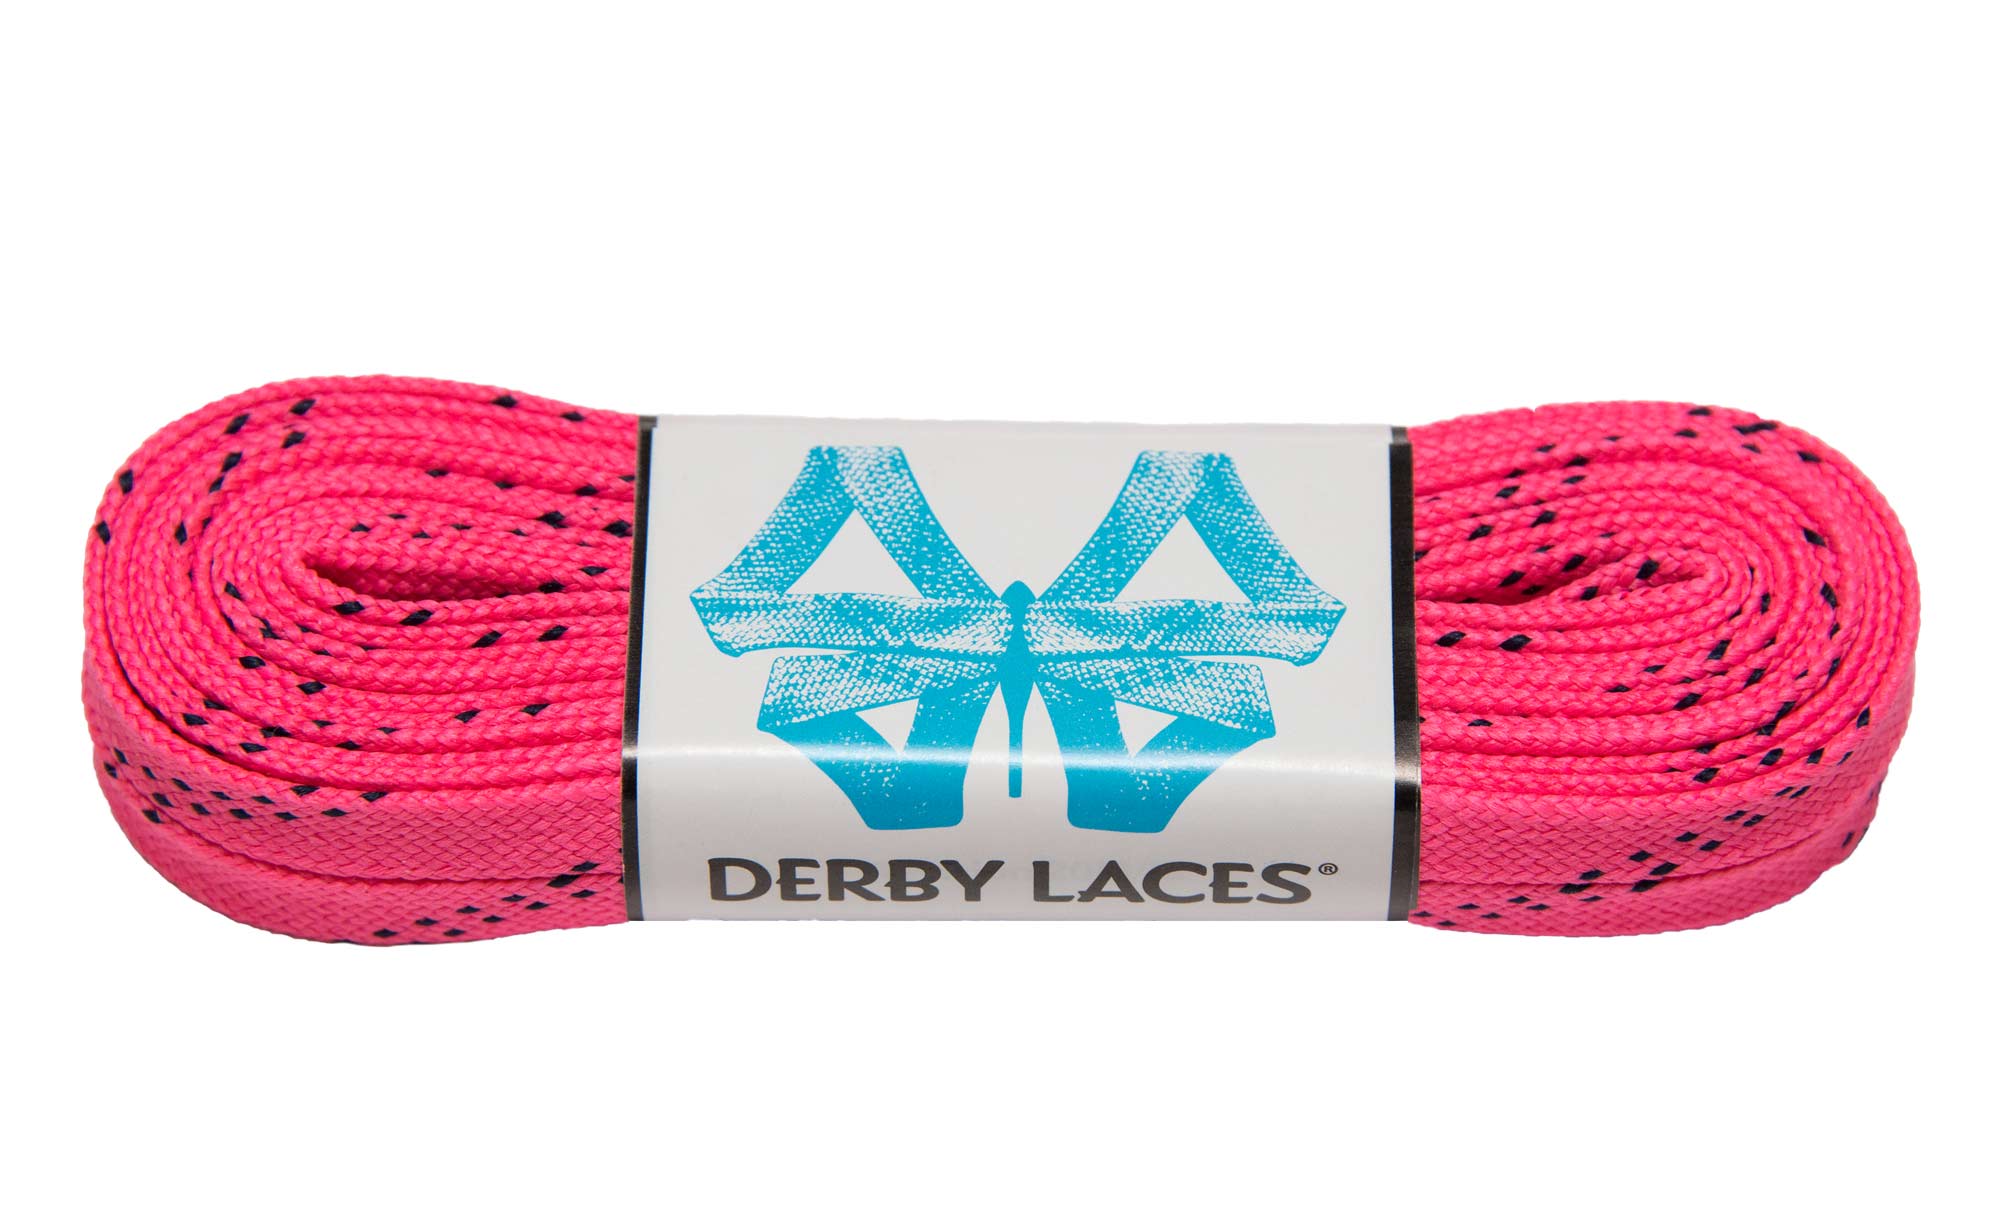 72 96 Pink Camouflage Derby Laces Waxed Roller Derby Skate Lace in 60 ... 84 